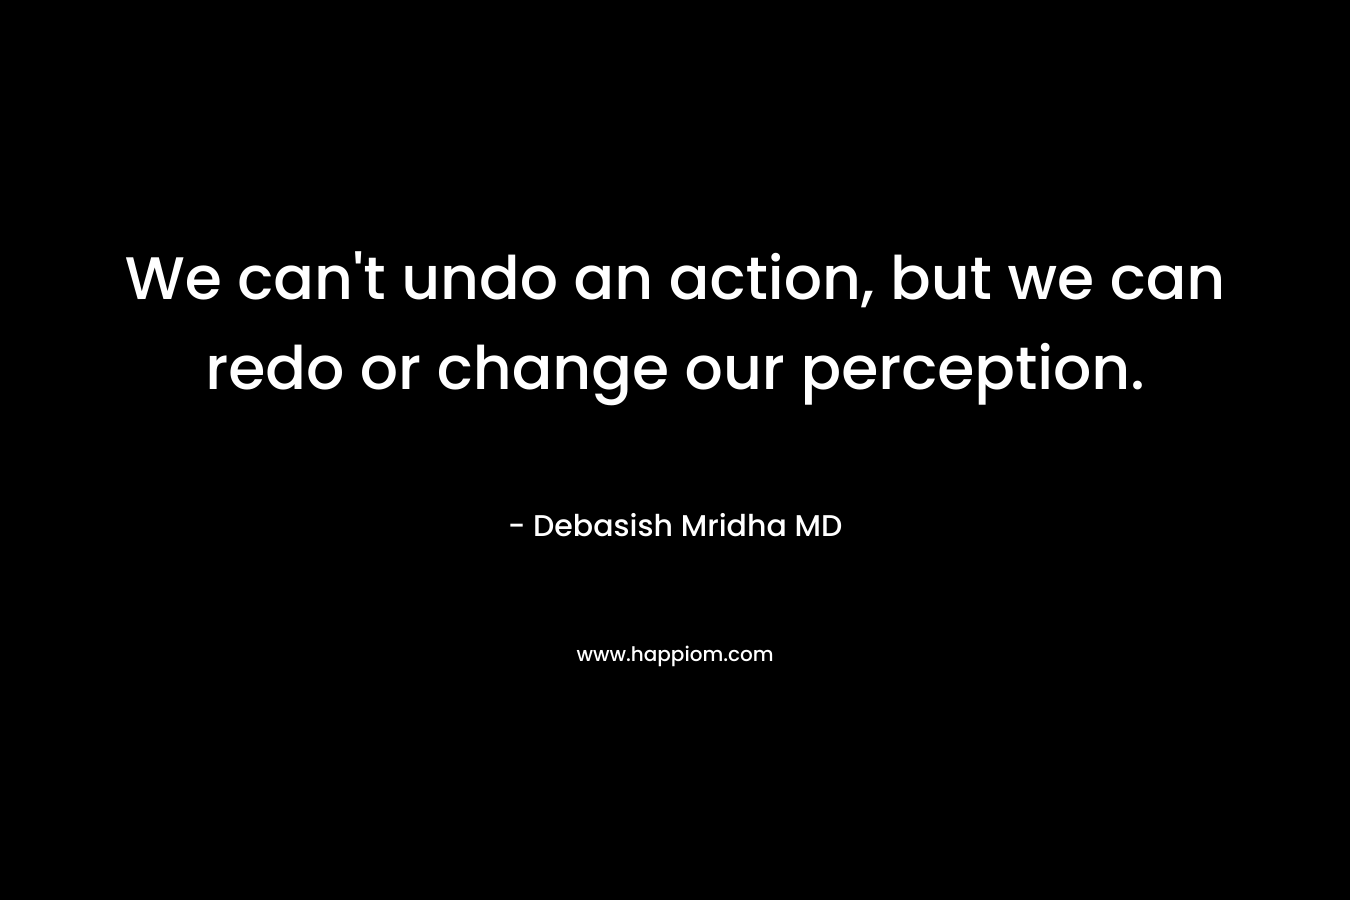 We can’t undo an action, but we can redo or change our perception. – Debasish Mridha MD